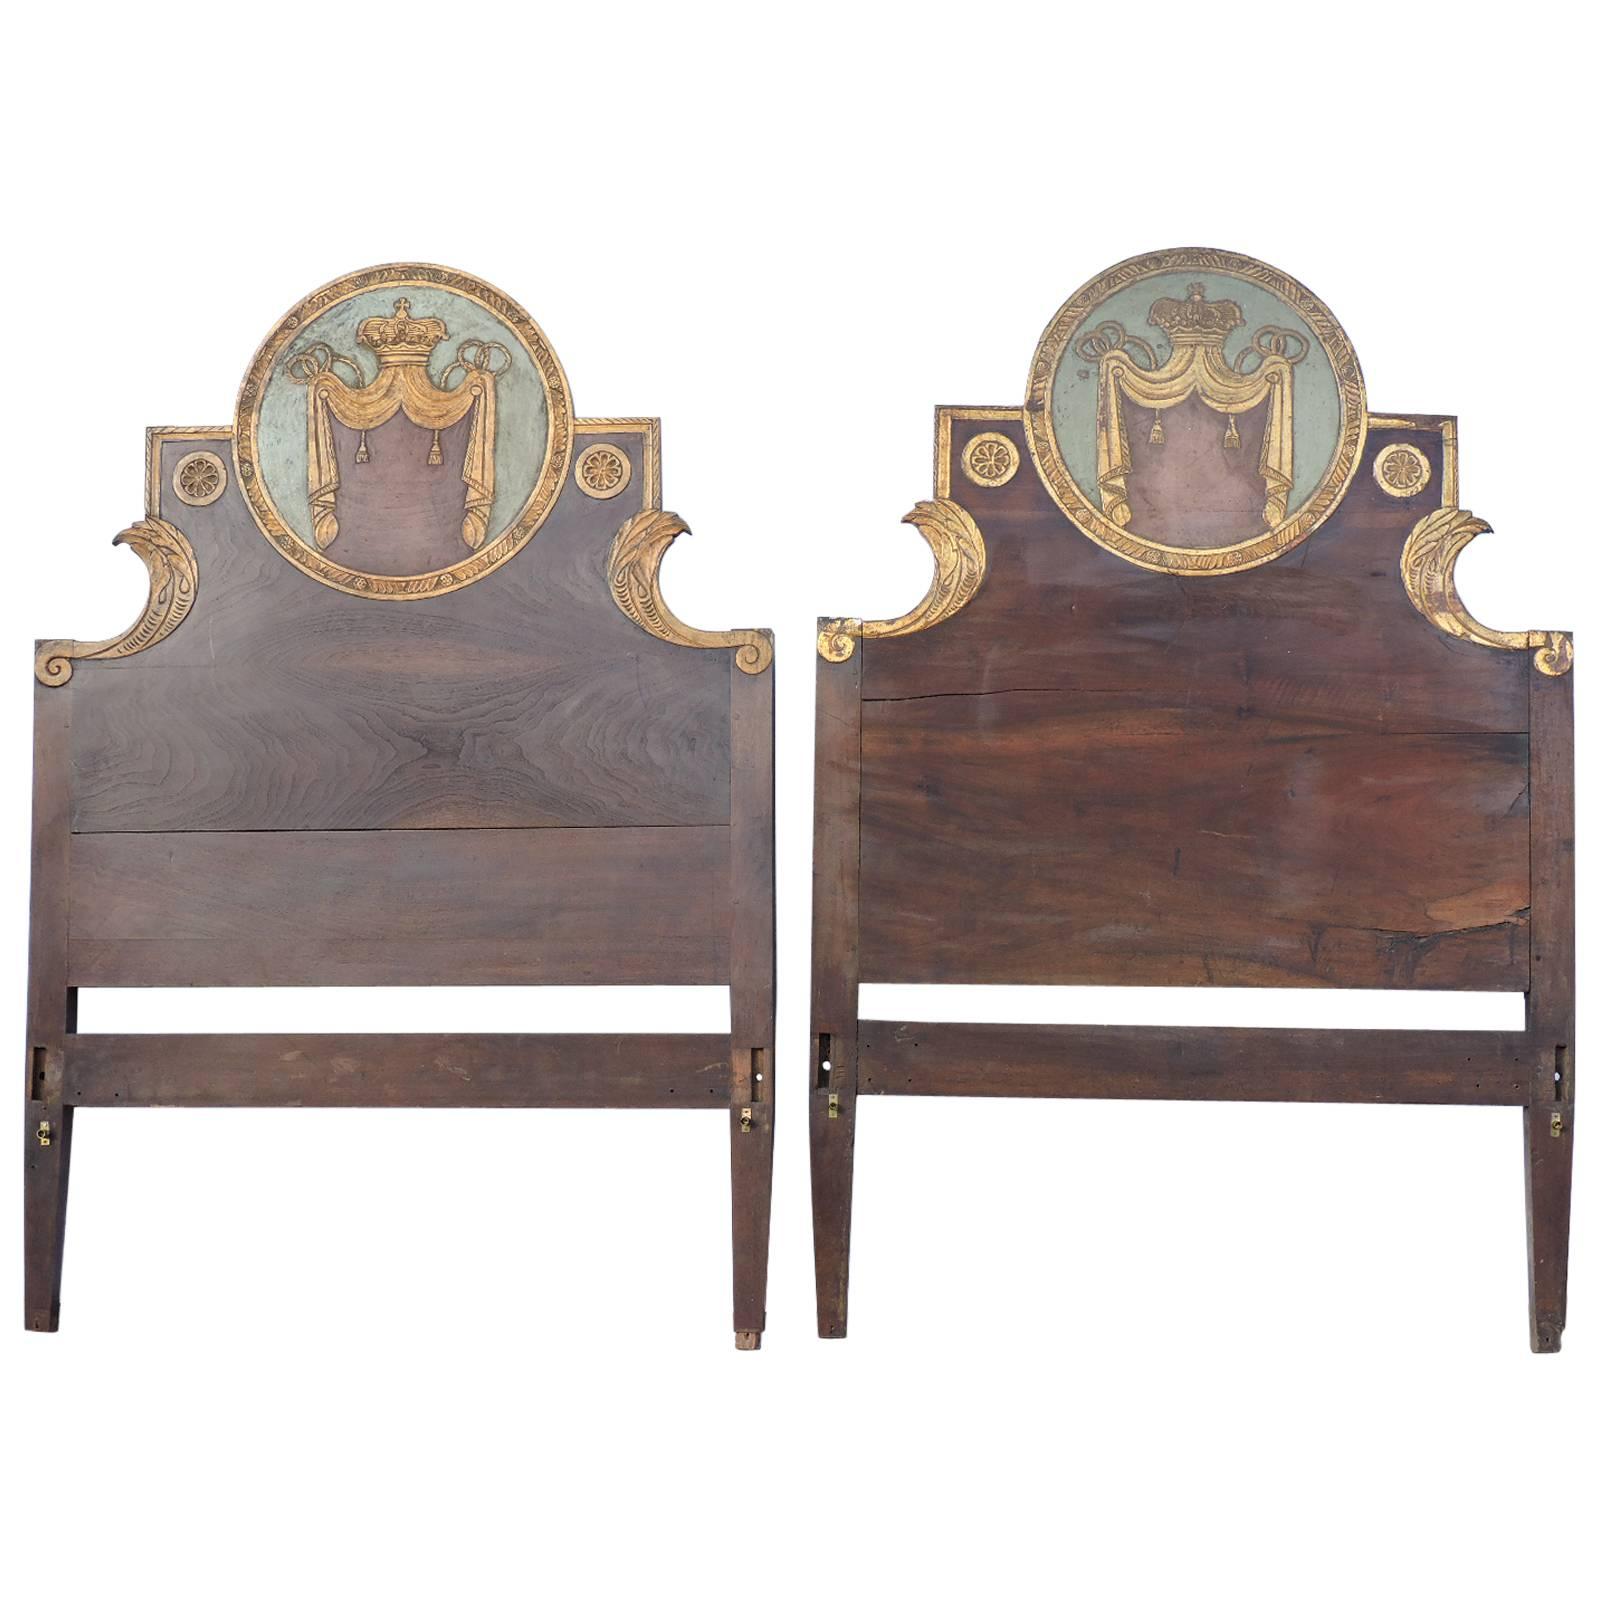 Pair of Antique Carved Painted & Gilded Italian Beds